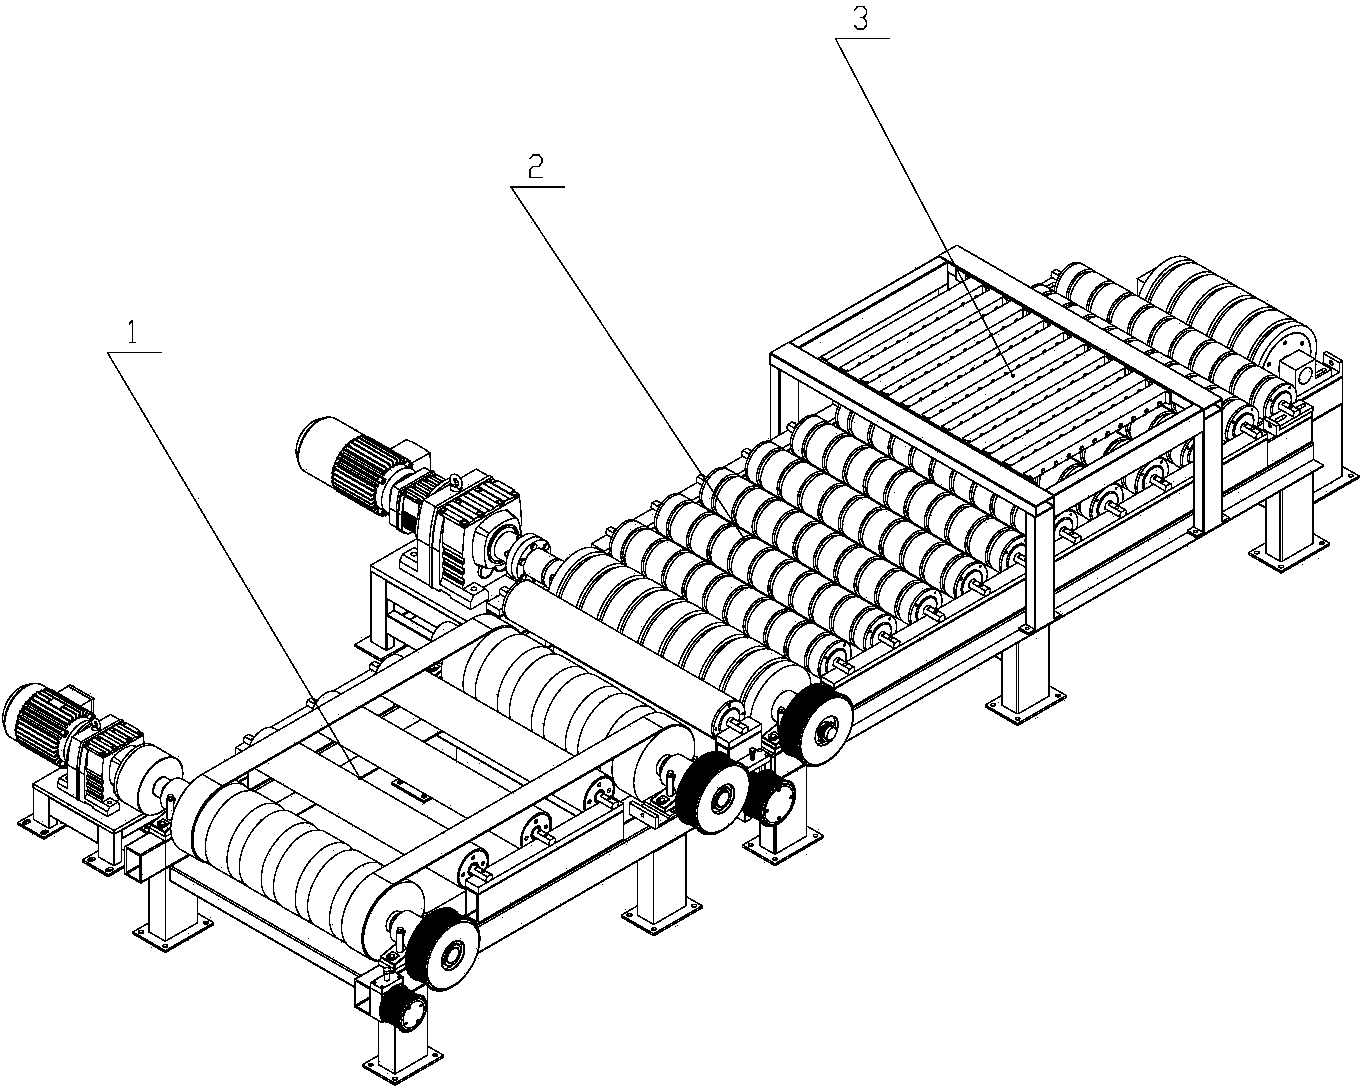 Building block cutting, feeding and conveying mechanism